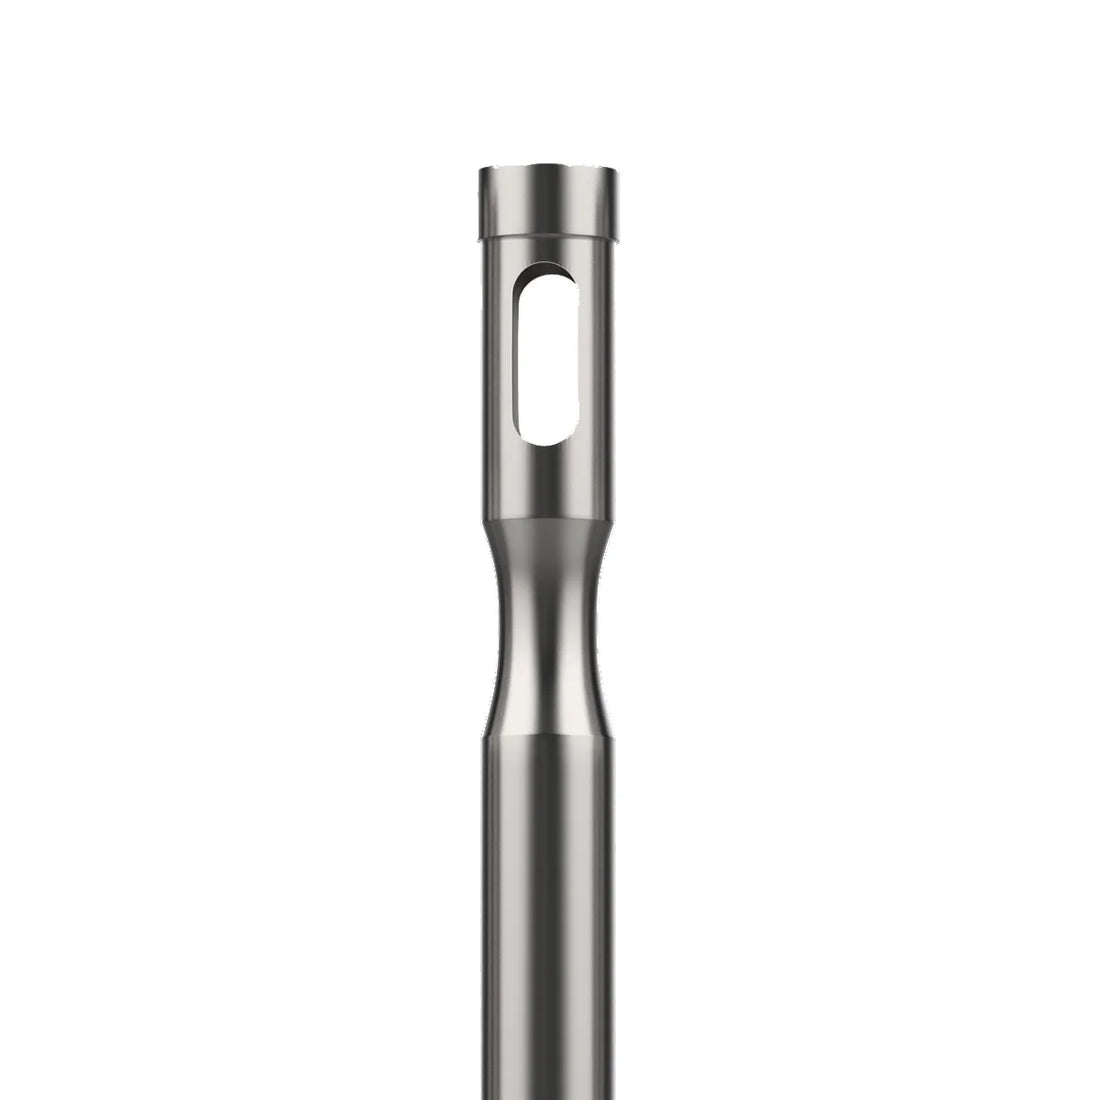 Podiatry stainless steel hollow drill bit (225.373.023) – tissue punch IQ Nails